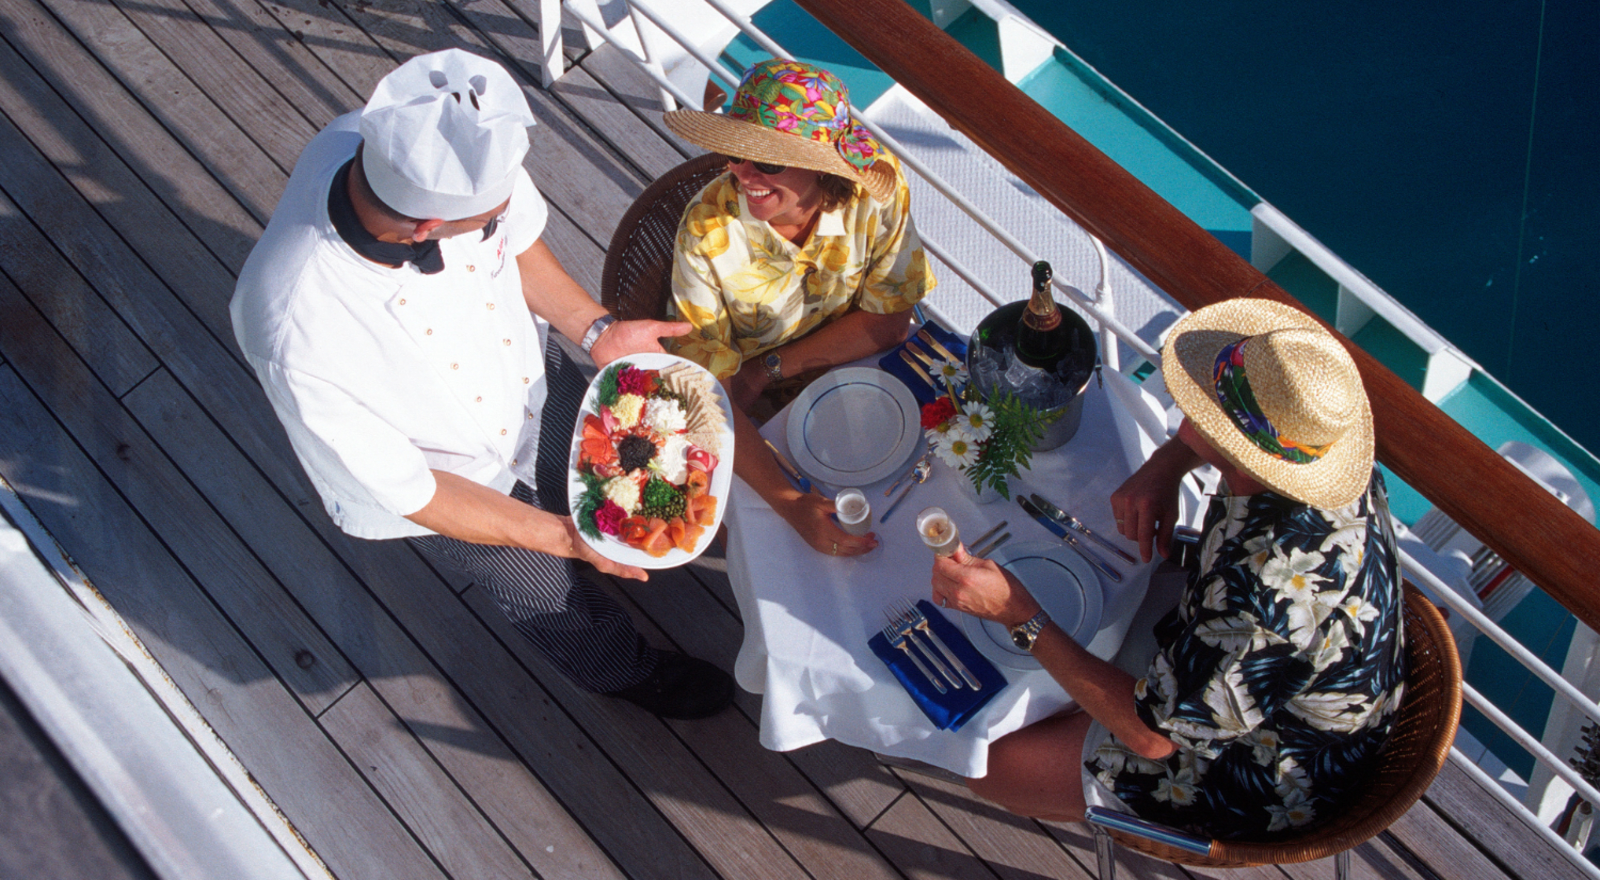 chef serving plate of food to couple sitting at table on outside deck of cruise ship